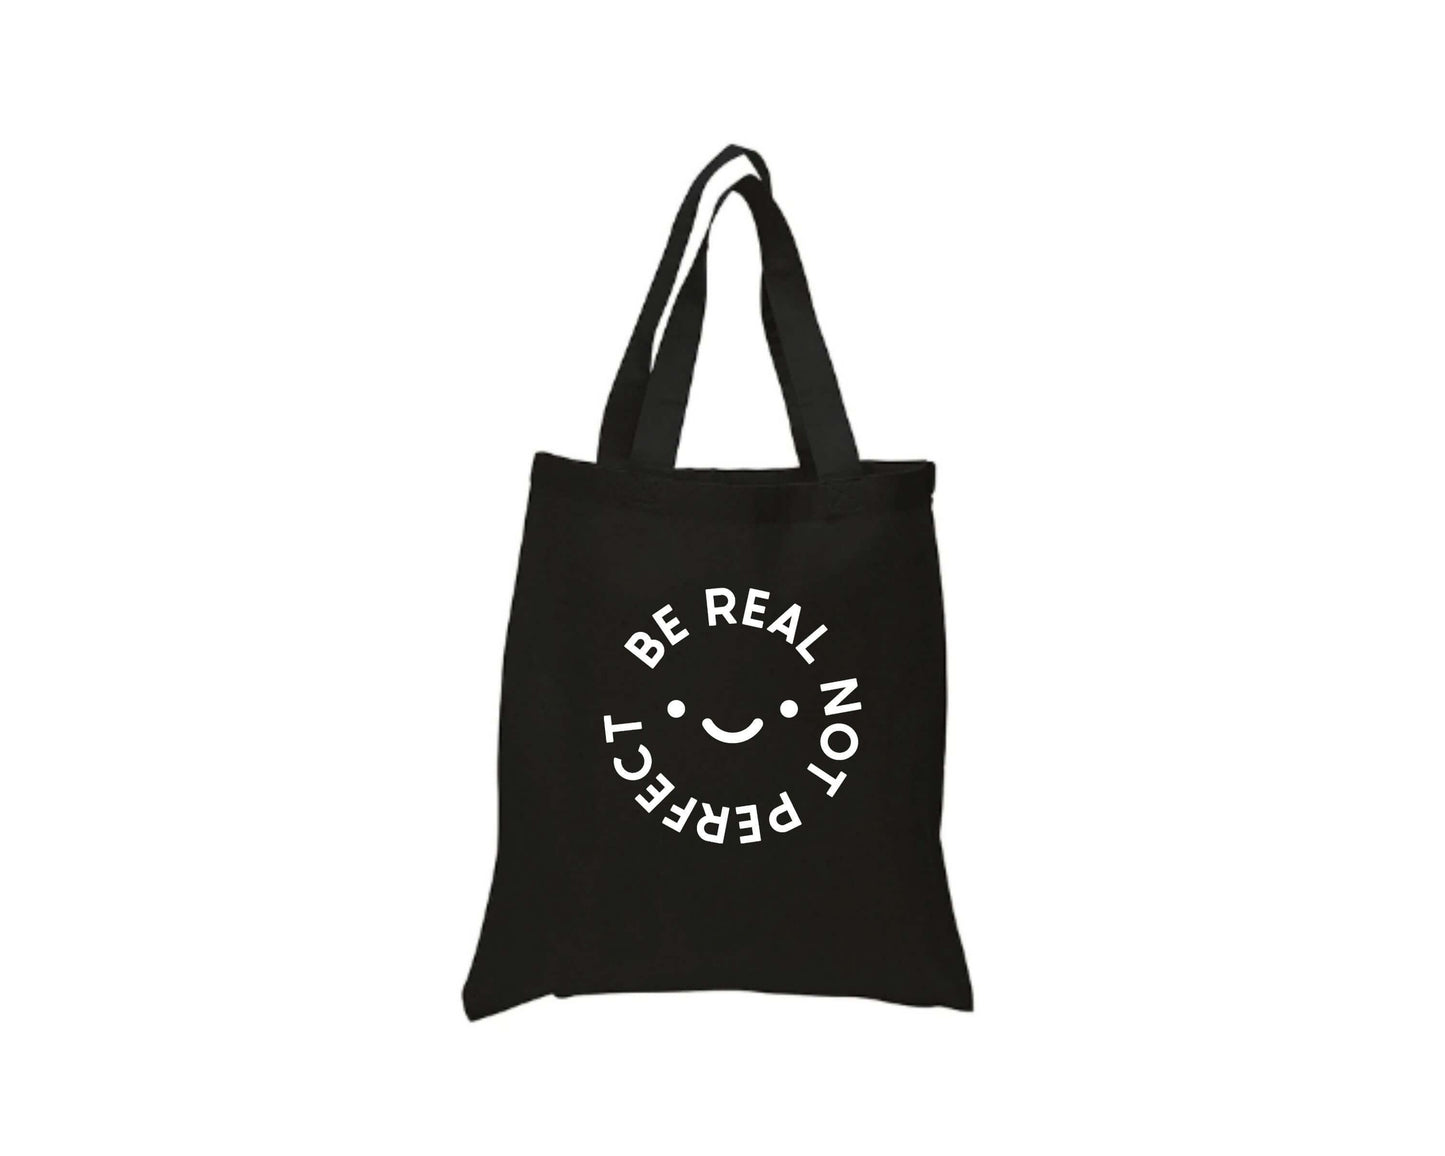 Be Real Not Perfect Tote Bag - Crystal Rose Design Co.